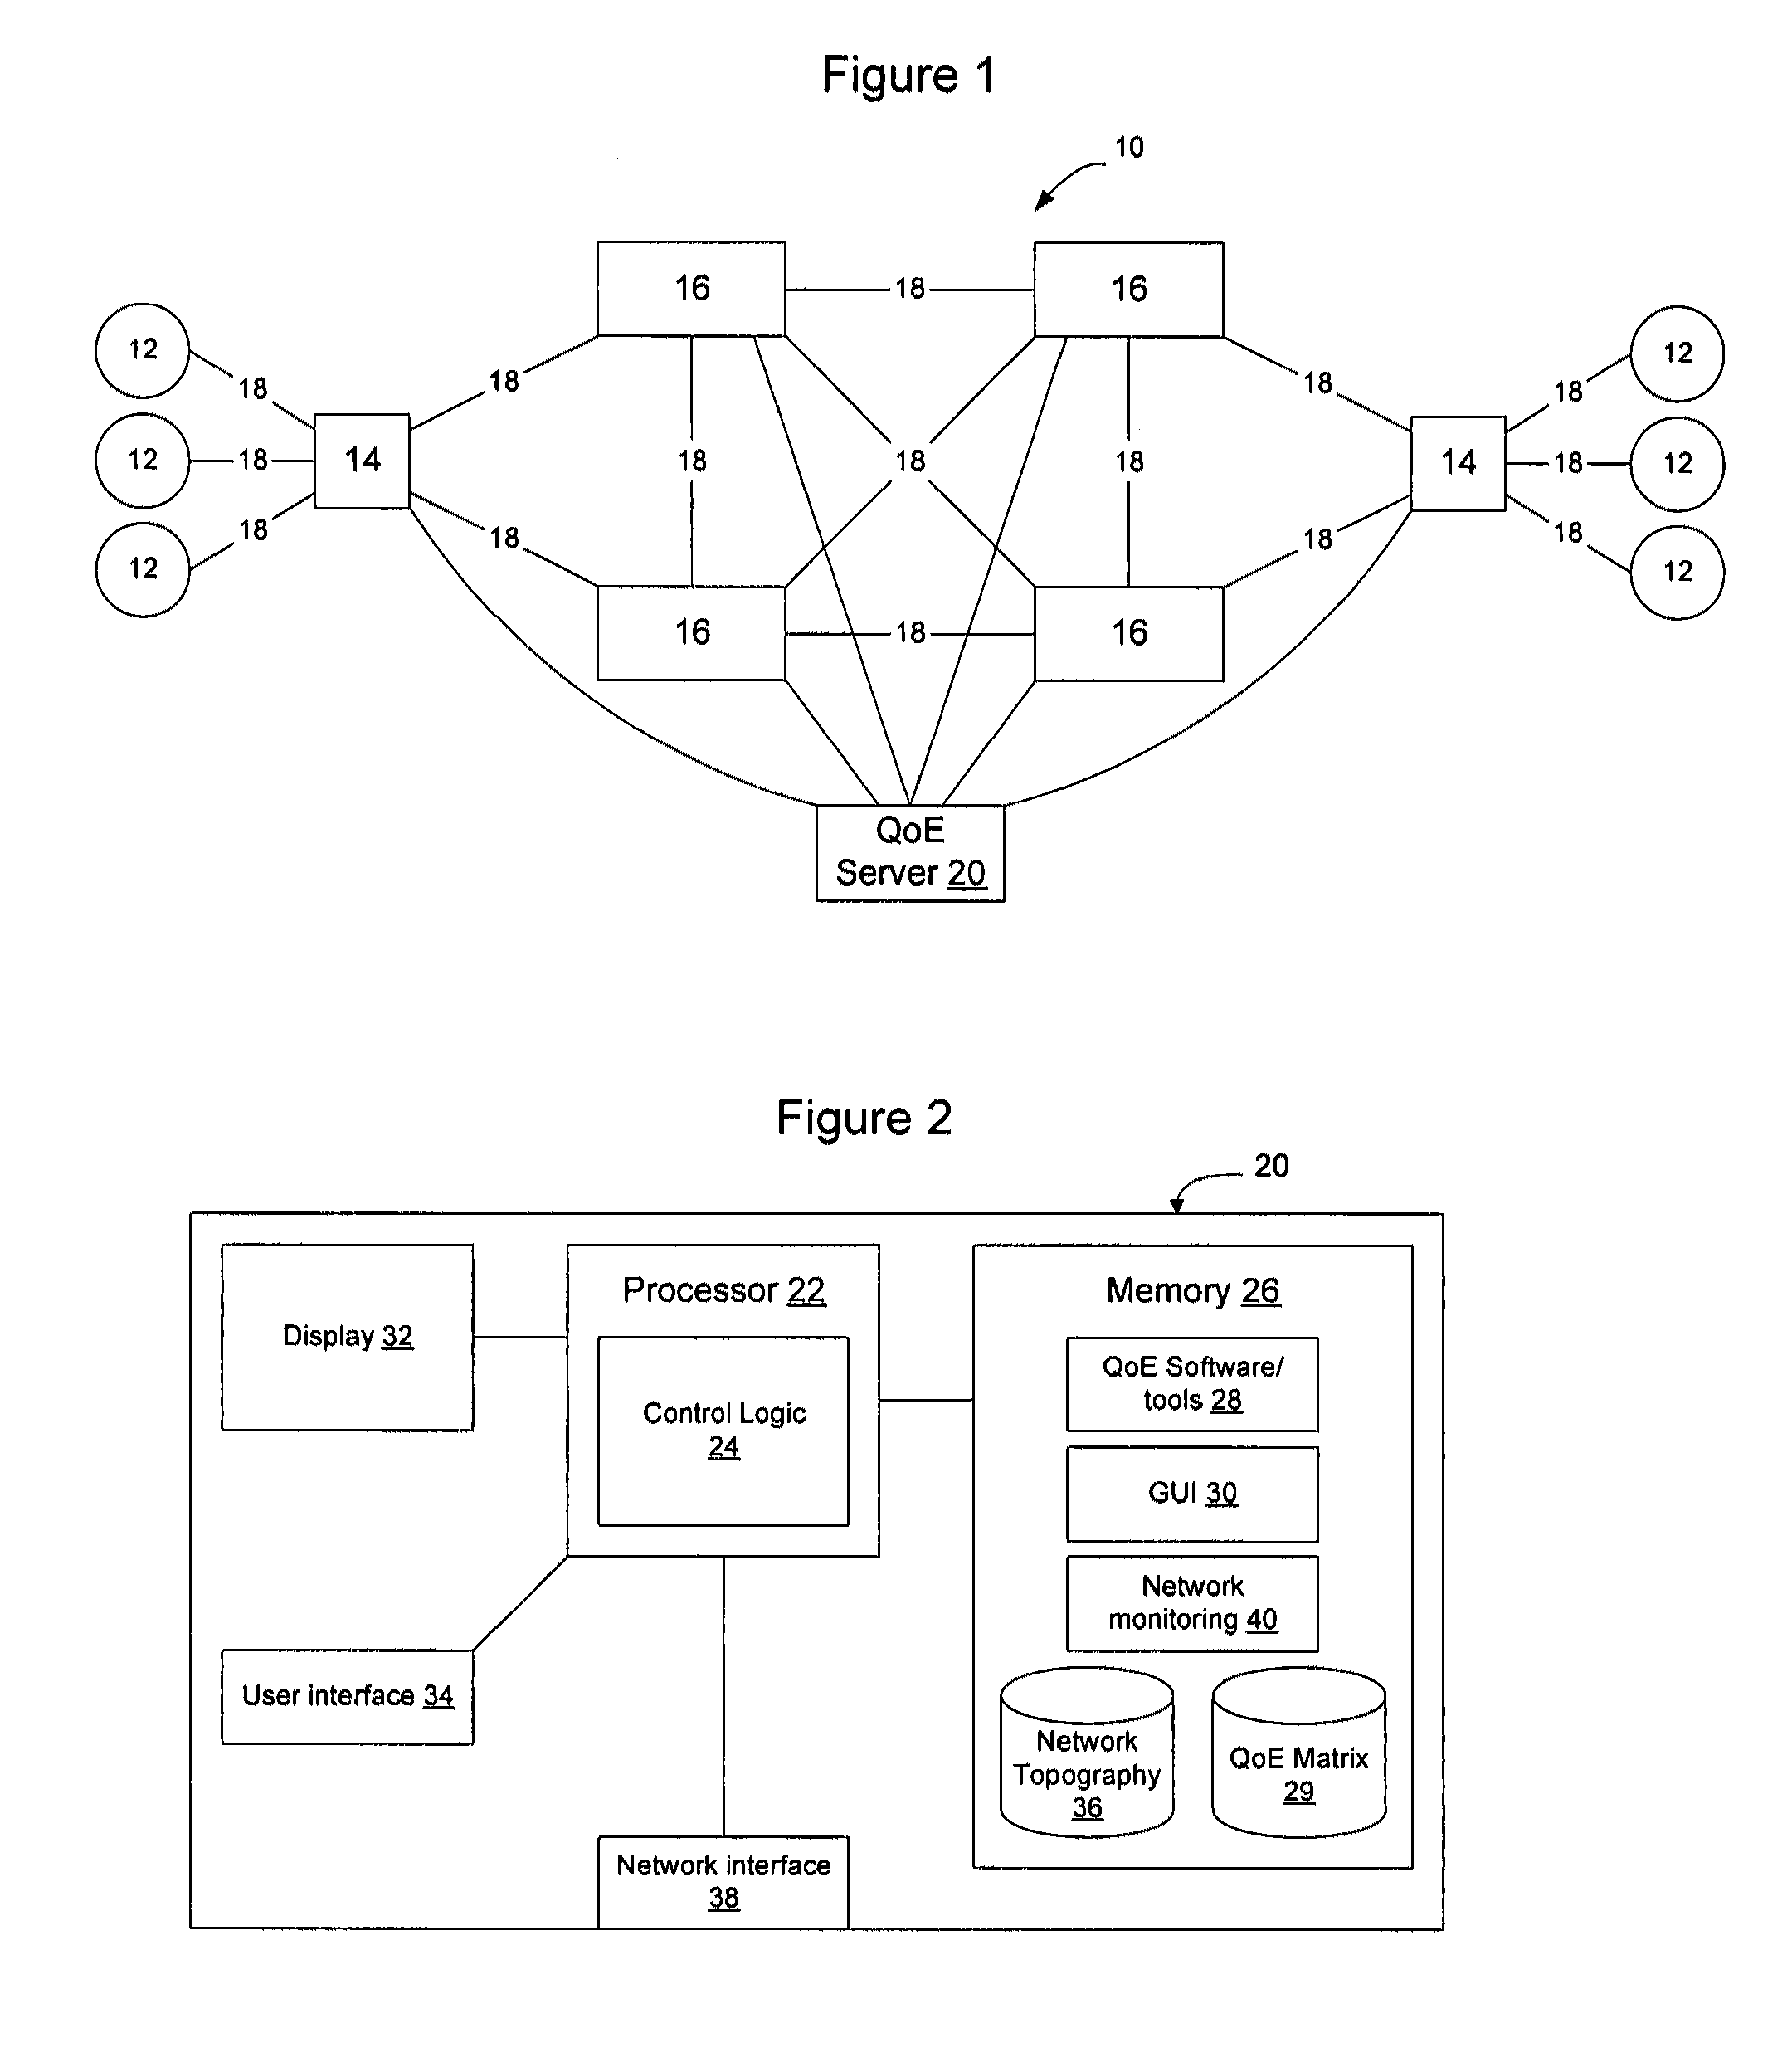 Method and apparatus for designing, updating and operating a network based on quality of experience